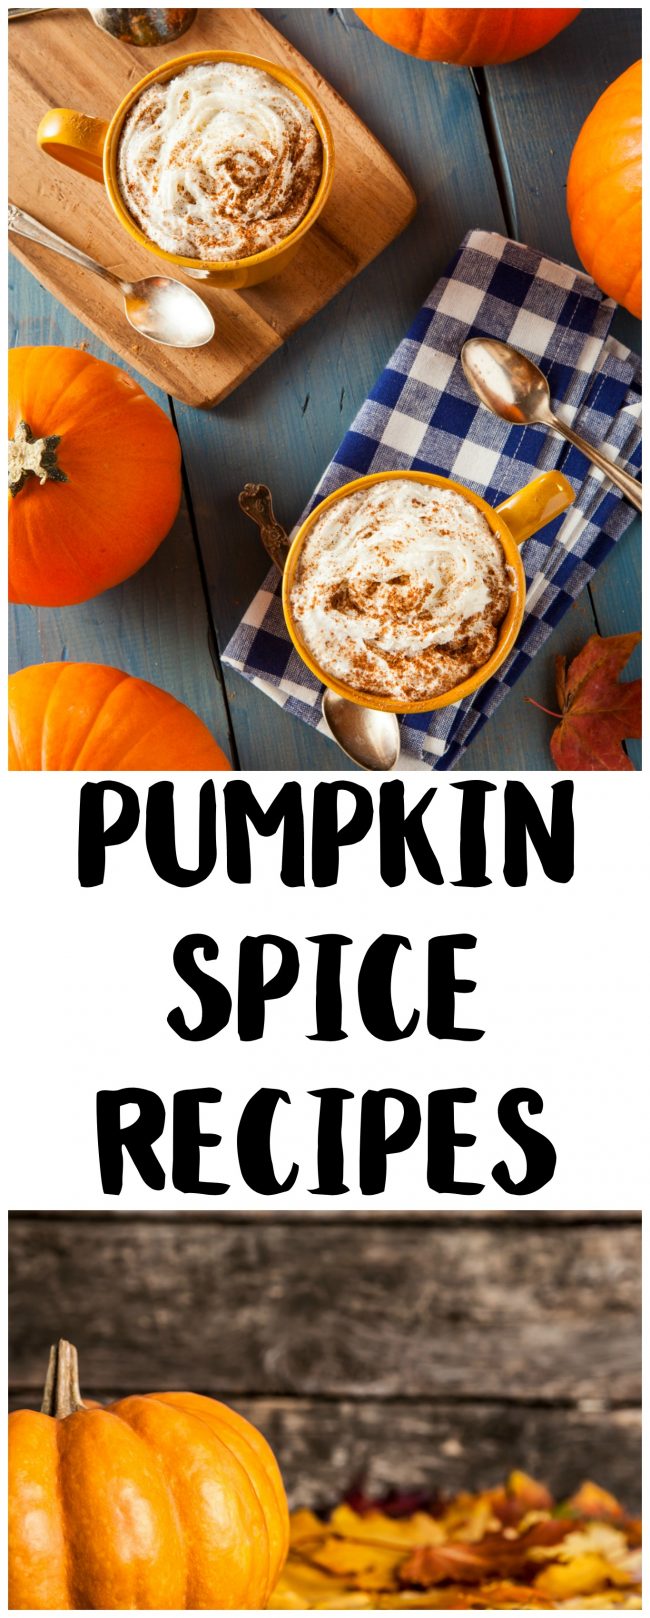 It’s fall, and that means it’s time for Pumpkin Spice everything! Get 50 delicious recipes- including a Pumpkin Spice Latte recipe {not from a mix!}, cookies, cake, creamer, Frappuccino, cupcakes, and even muffins! There are enough recipes here to last you all season long.